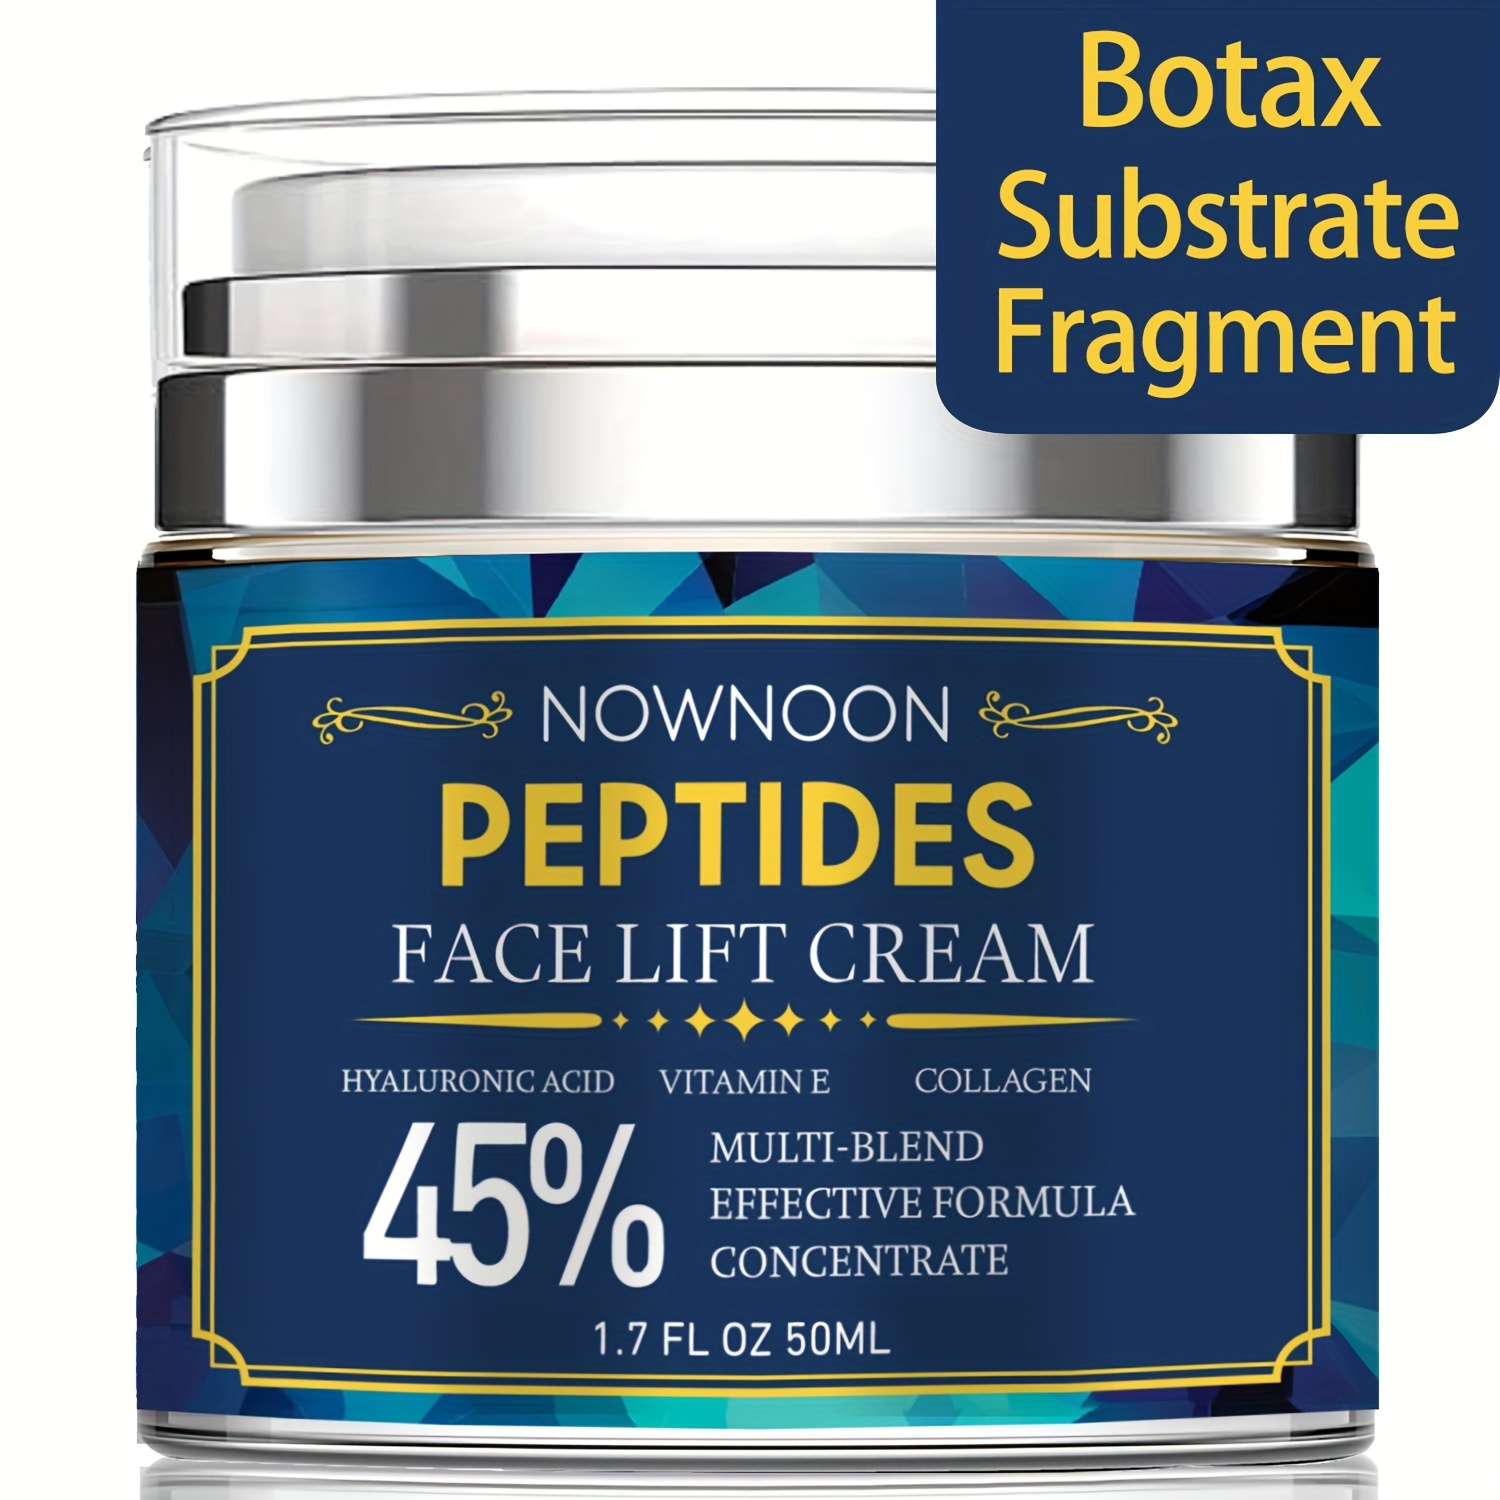 

1.7 Fl.oz Peptide Face Lift Cream With Hyaluronic Acid, Vitamin E And Collagen - Moisturize, Firm And Tighten Skin